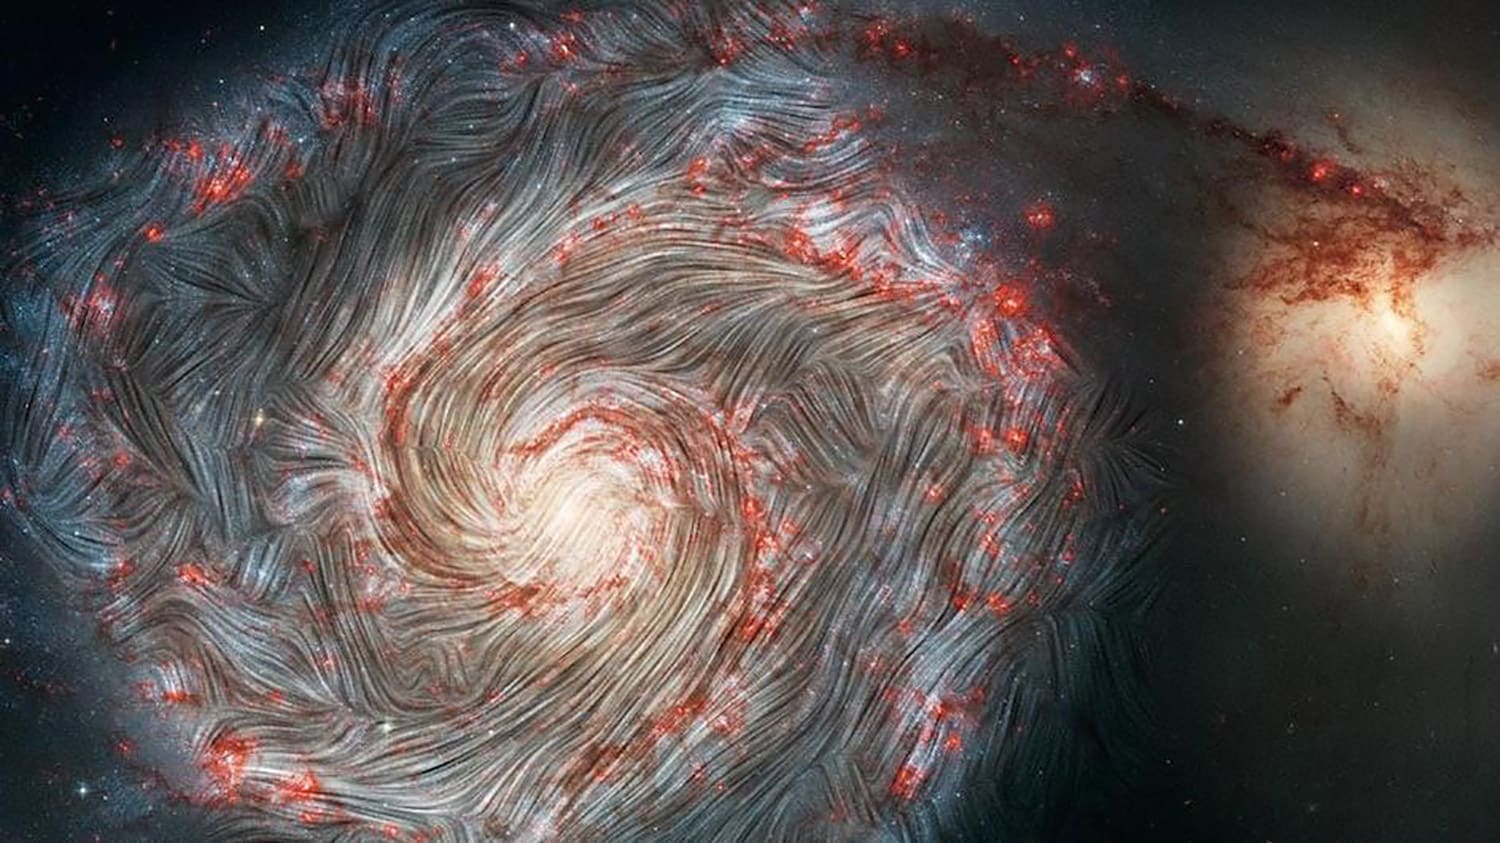 The magnetic field in the Whirlpool Galaxy (M51)